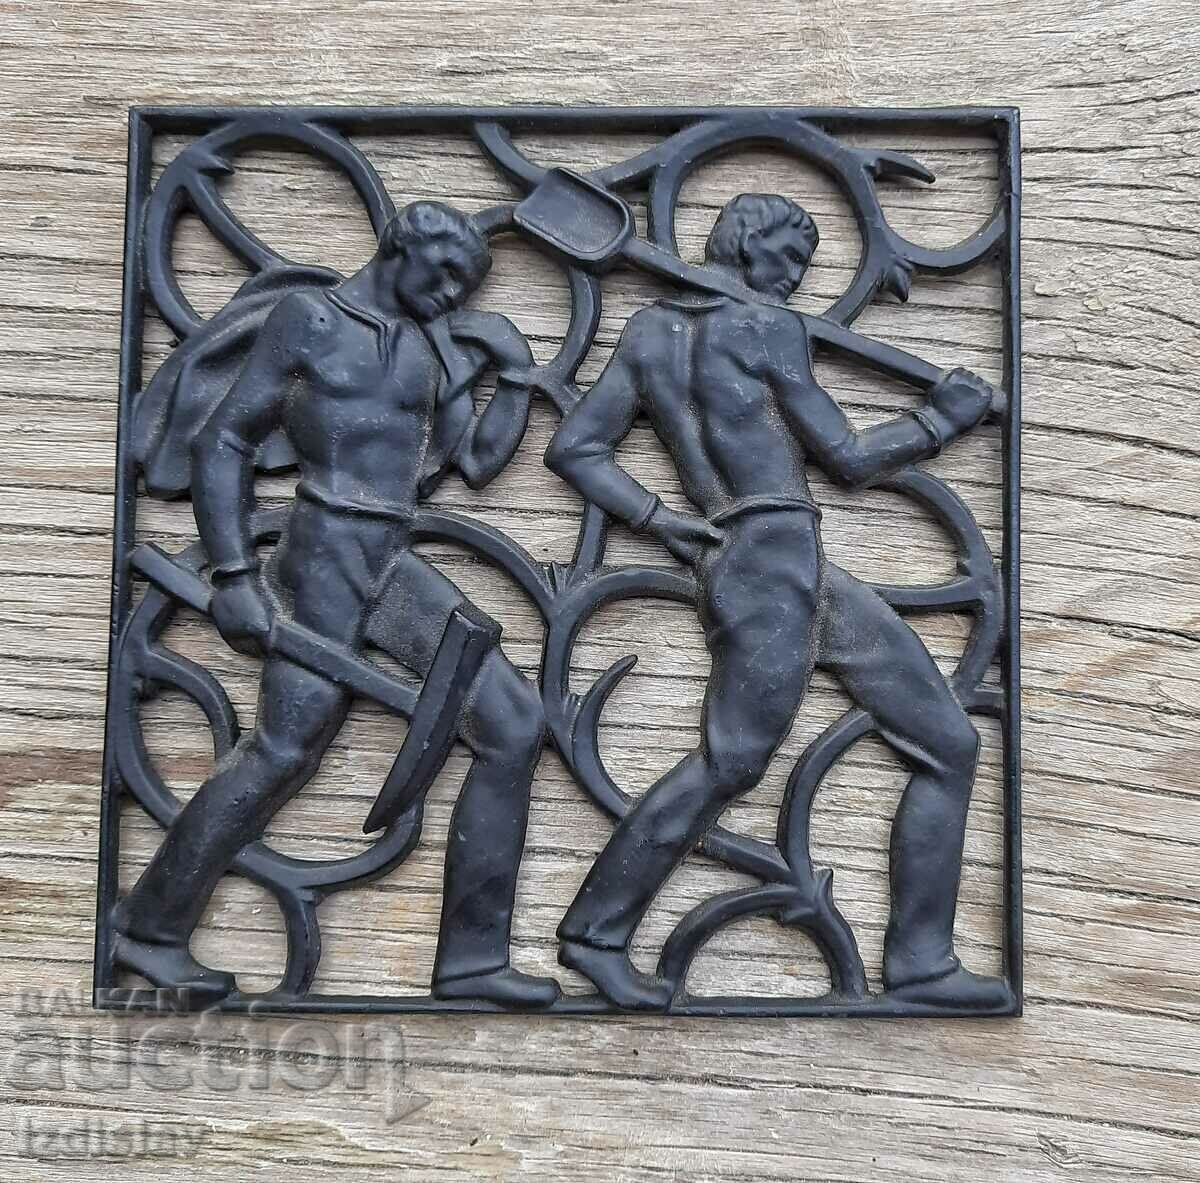 Art Deco wall relief by Heinrich Moschage